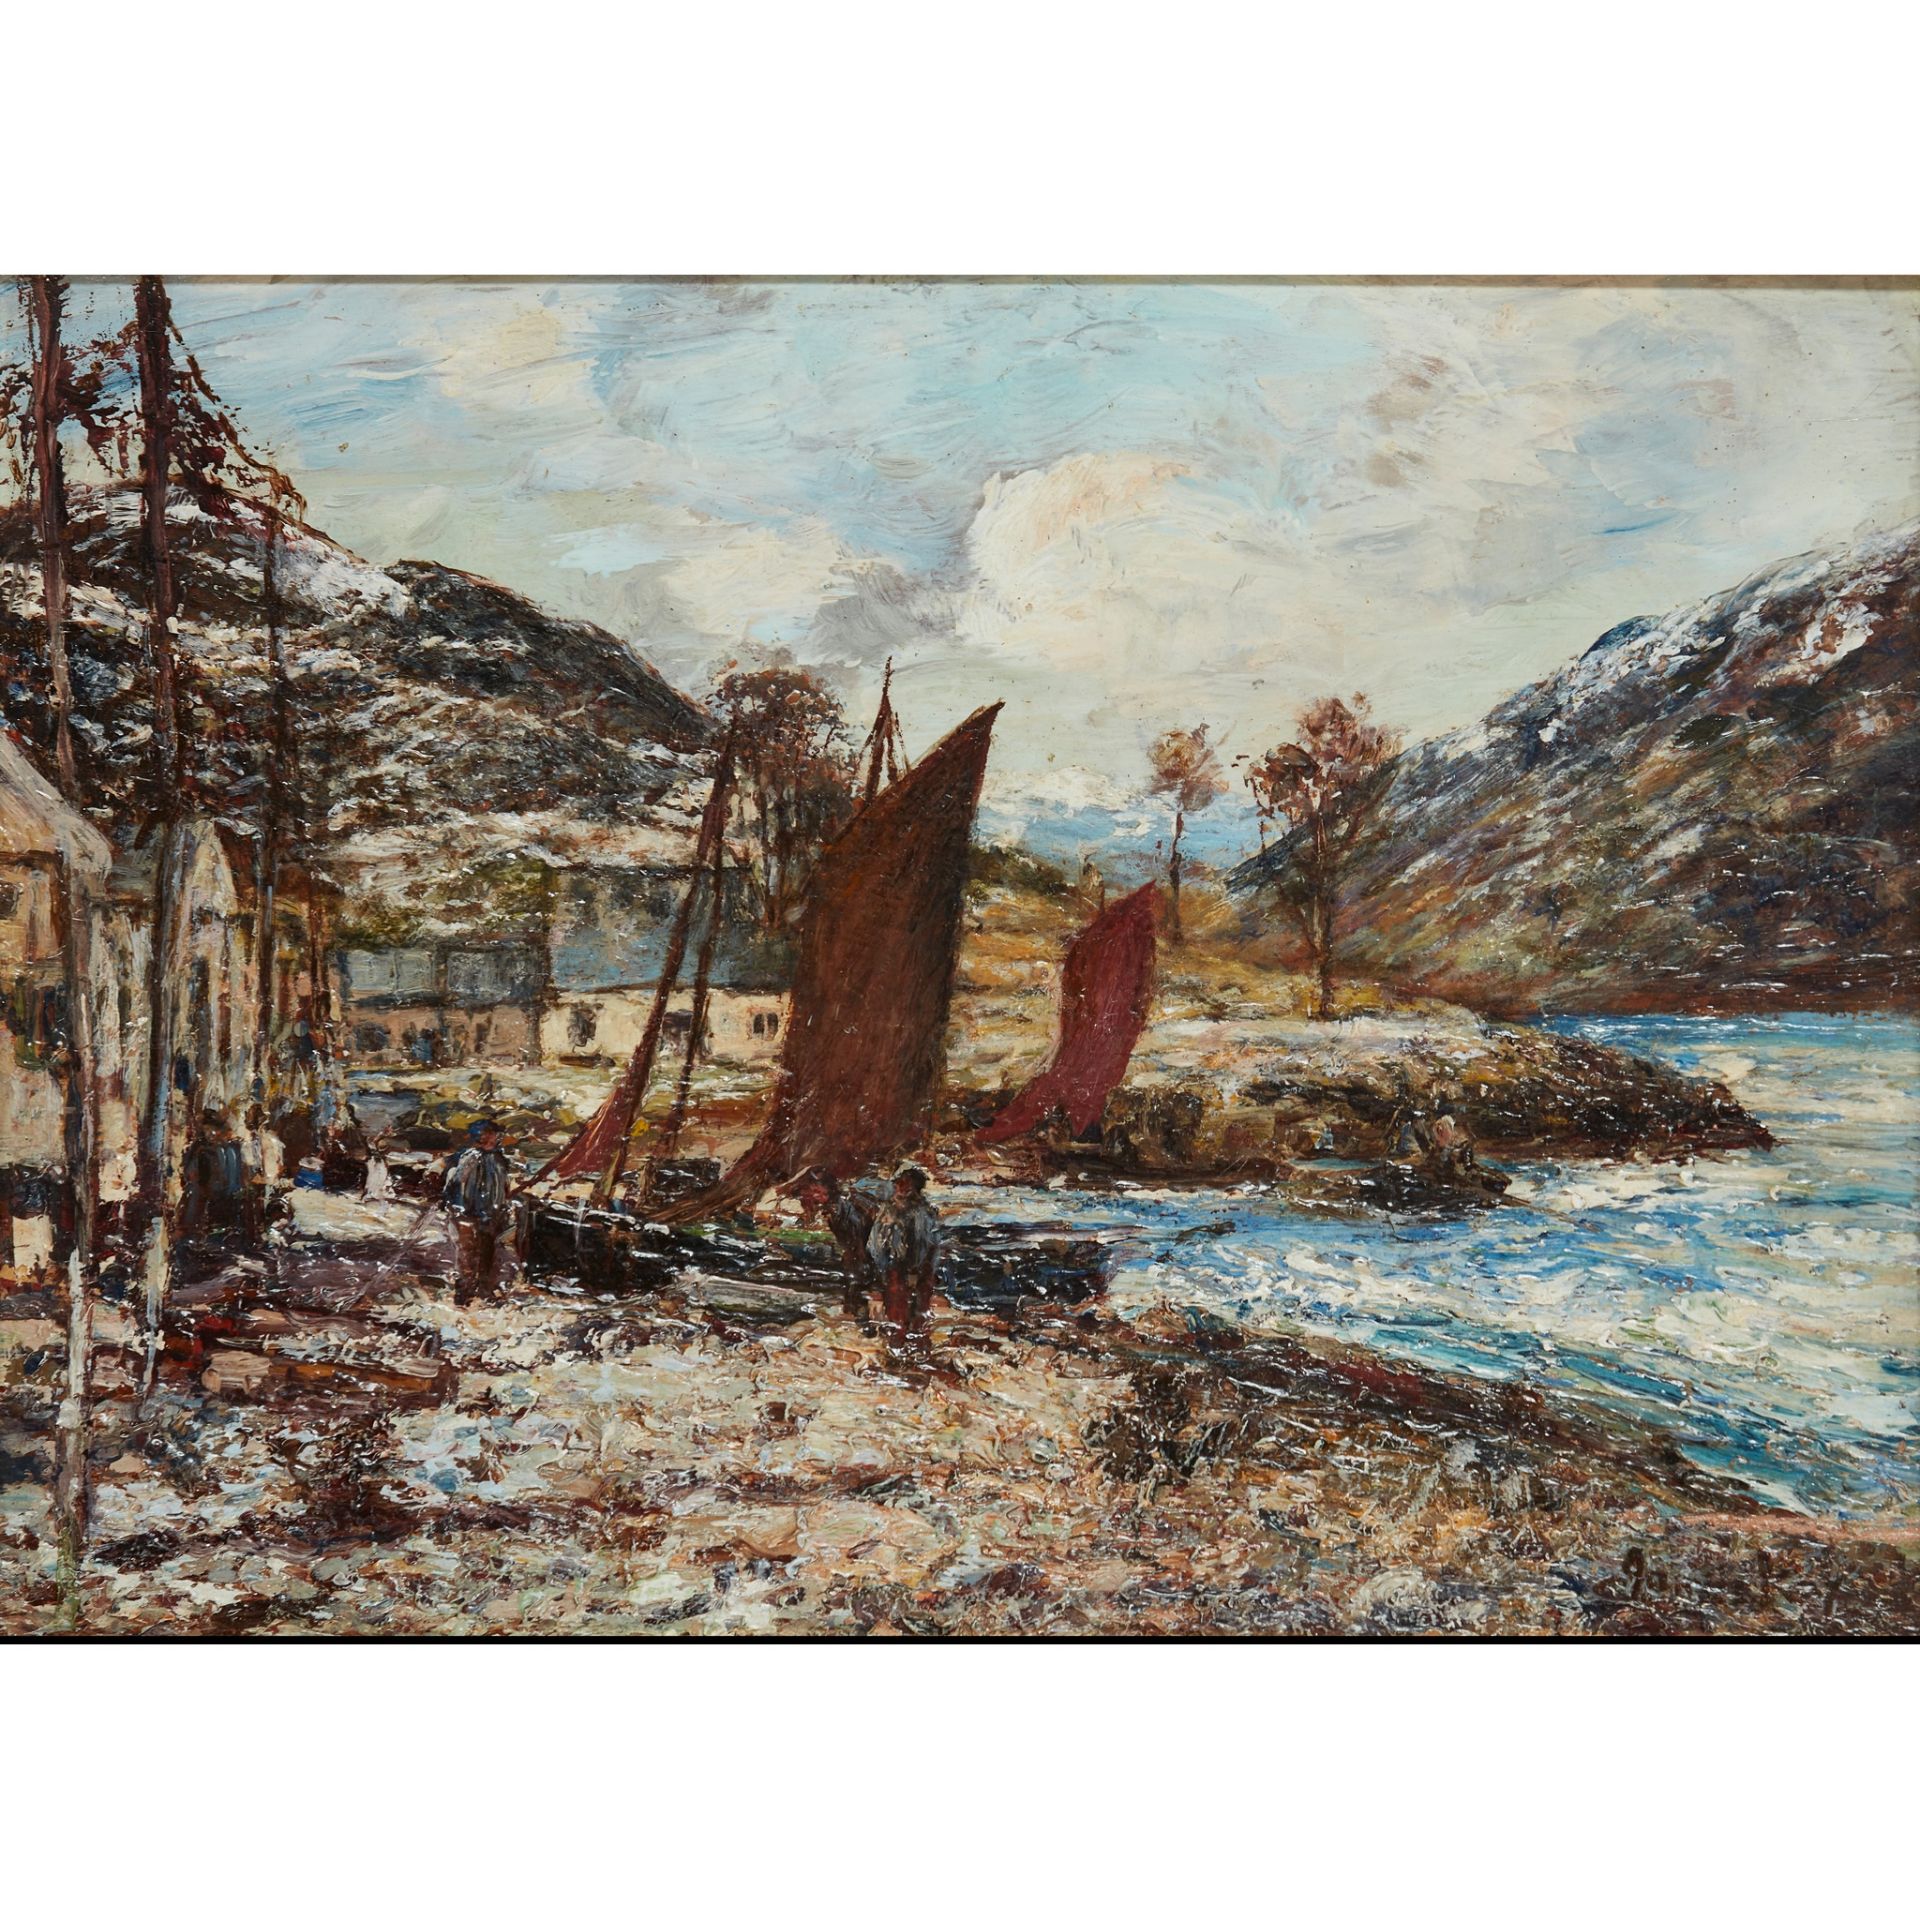 JAMES KAY R.S.A., R.S.W. (SCOTTISH 1858-1942) BEACHED FISHING BOATS